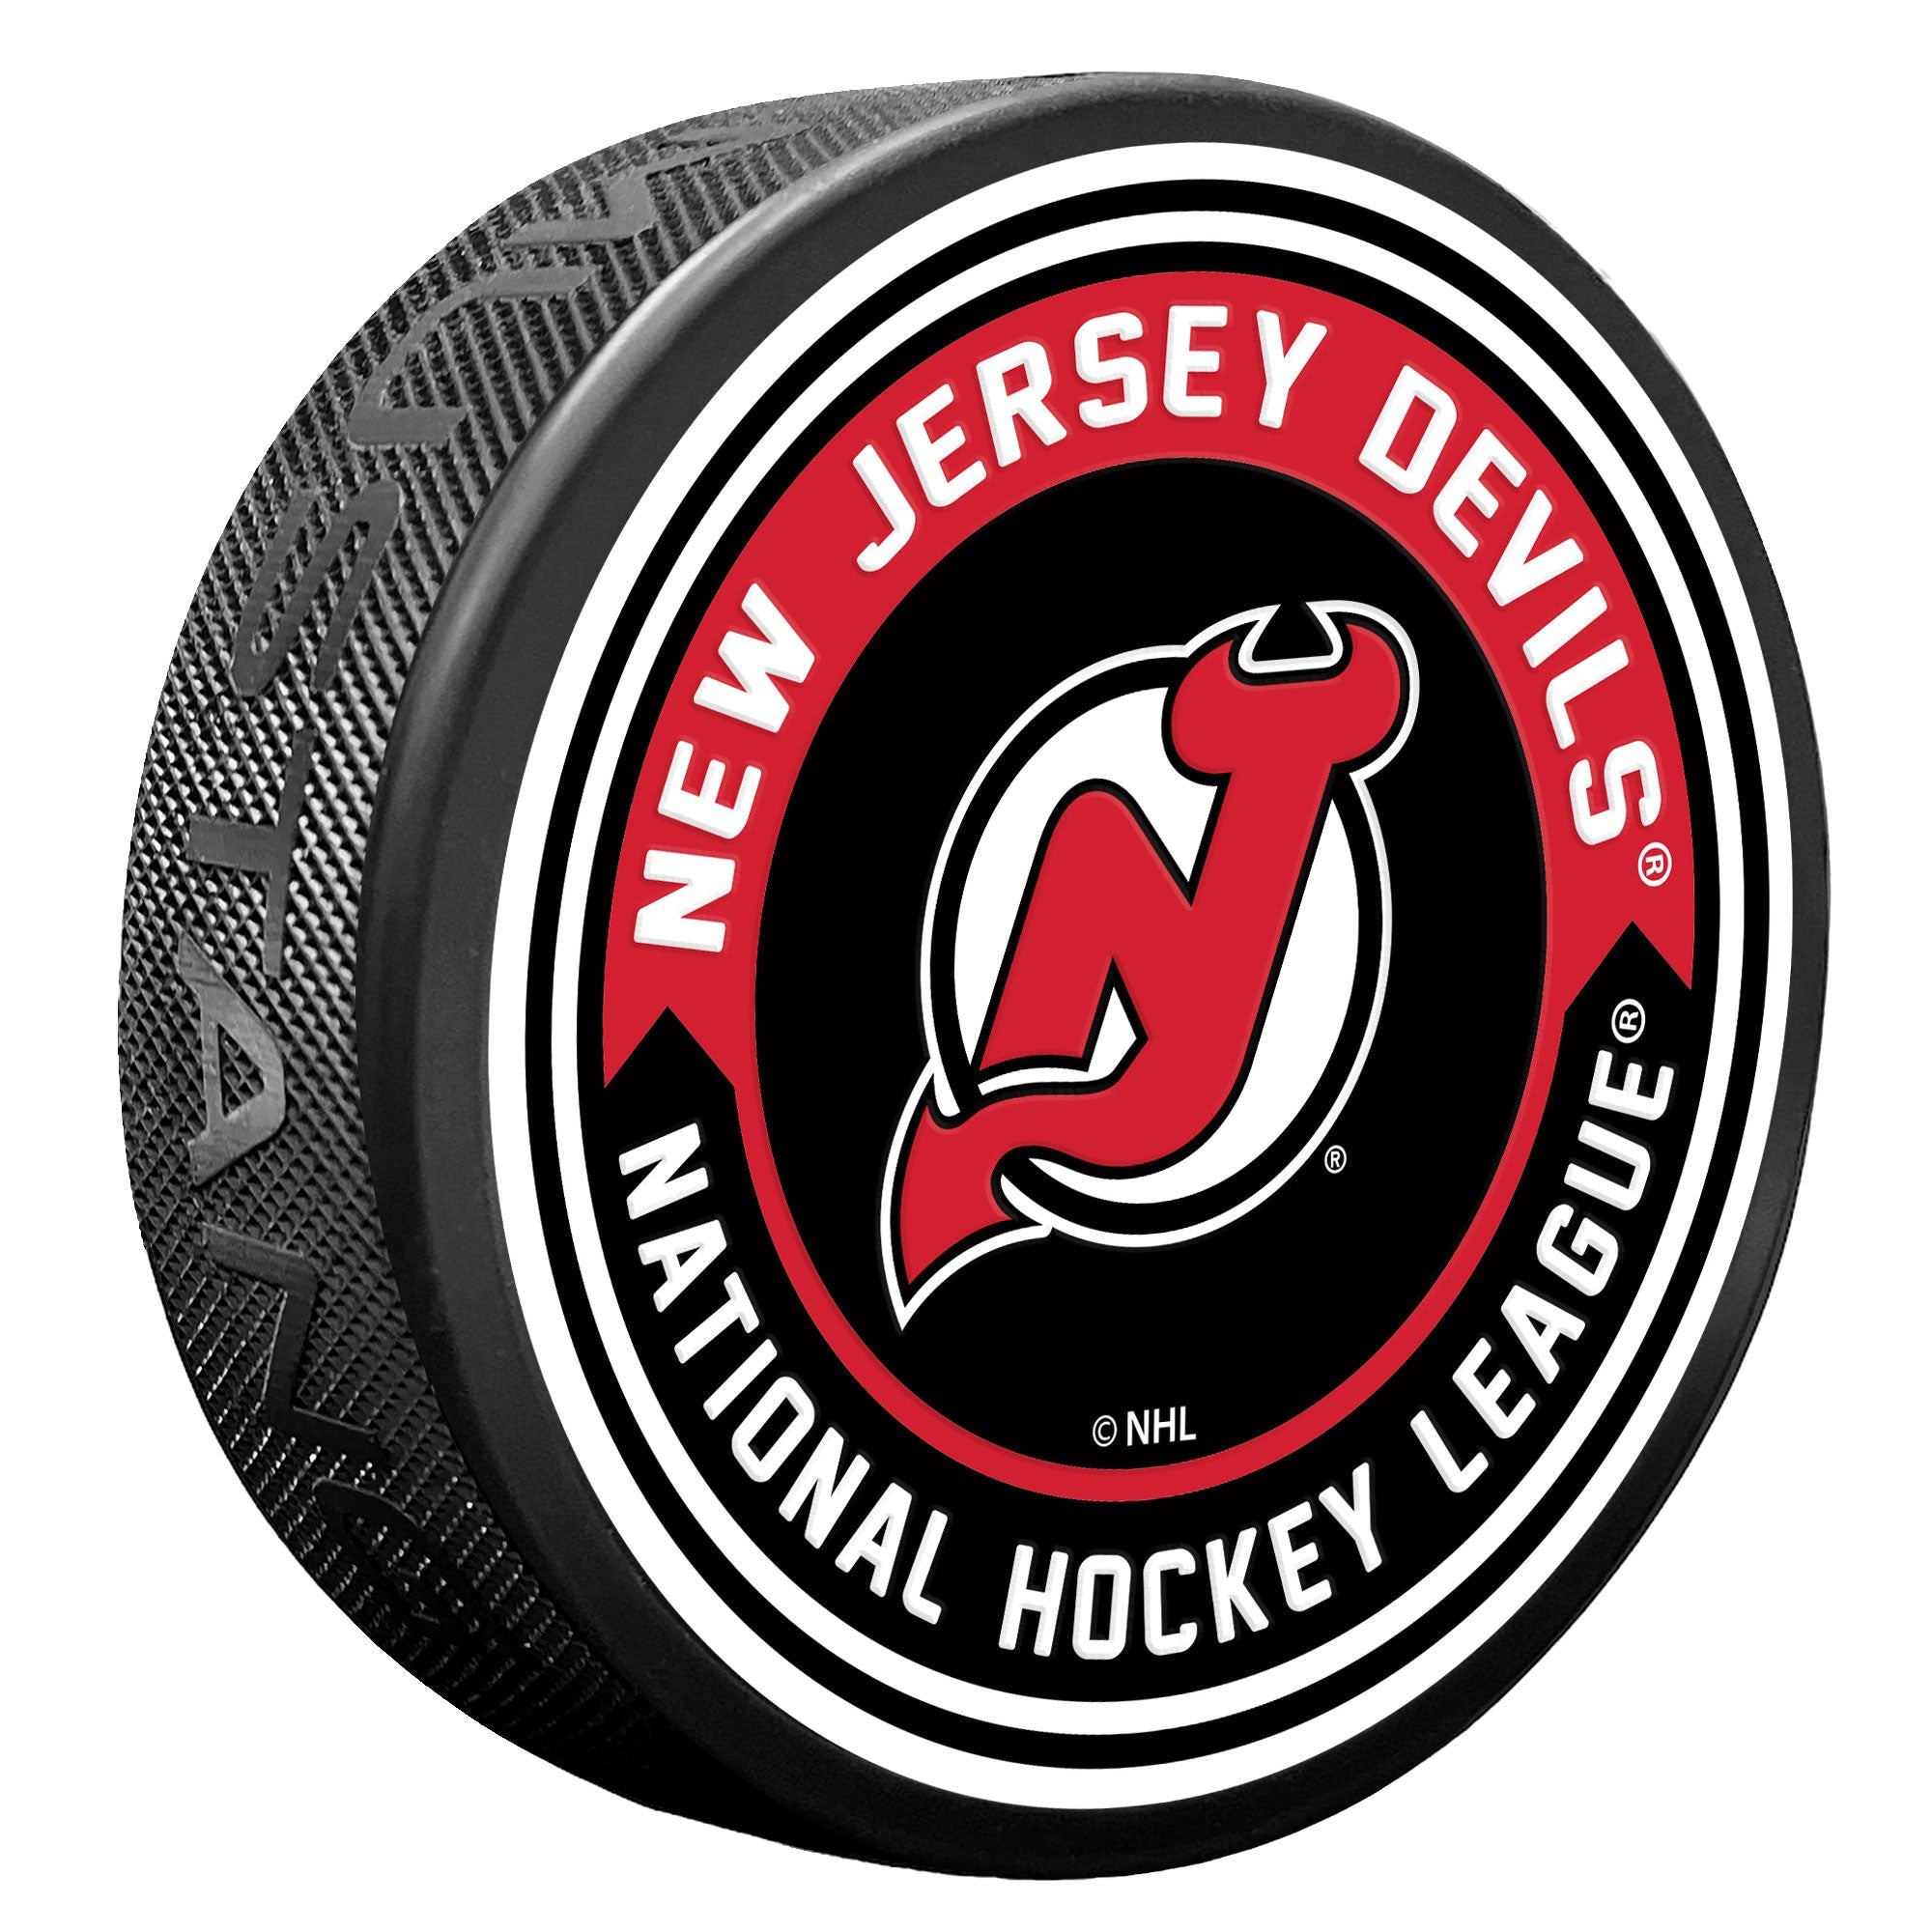 New Jersey Devils Official NHL Hockey Puck